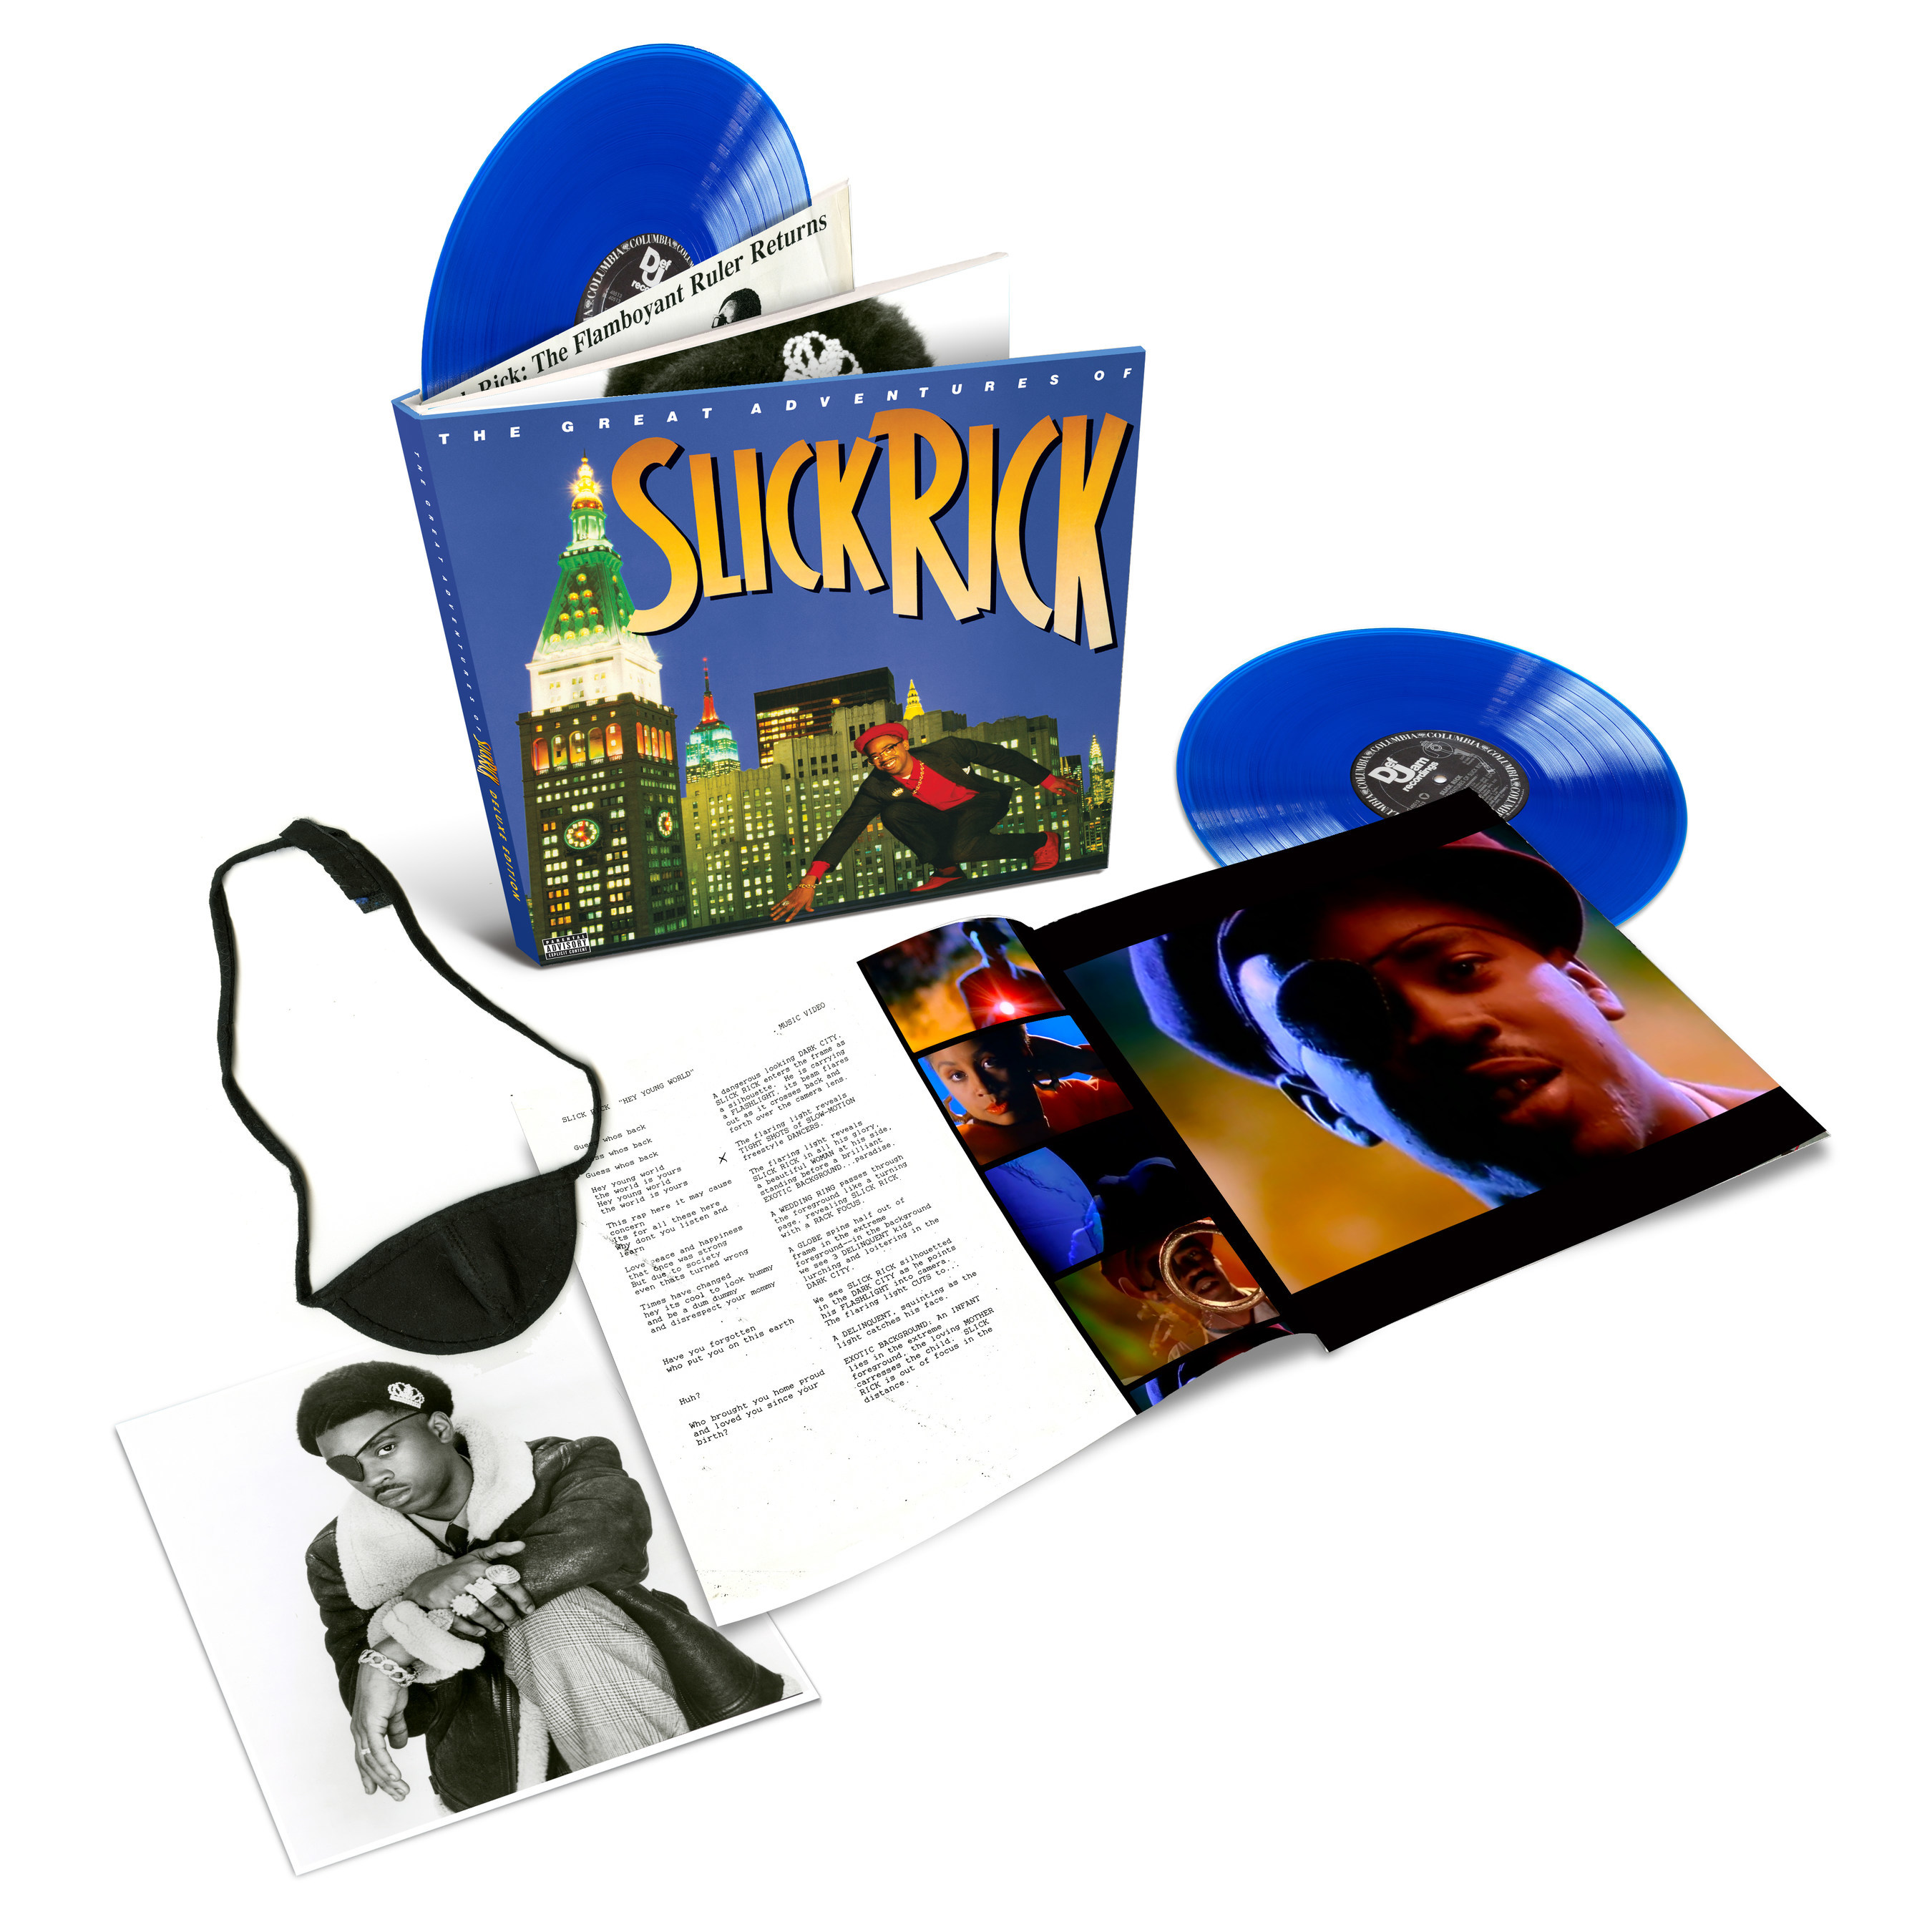 The Ruler Returns Slick Rick Celebrates 30 Years Of An Unprecedented Legacy With The Great Adventures Of Slick Rick